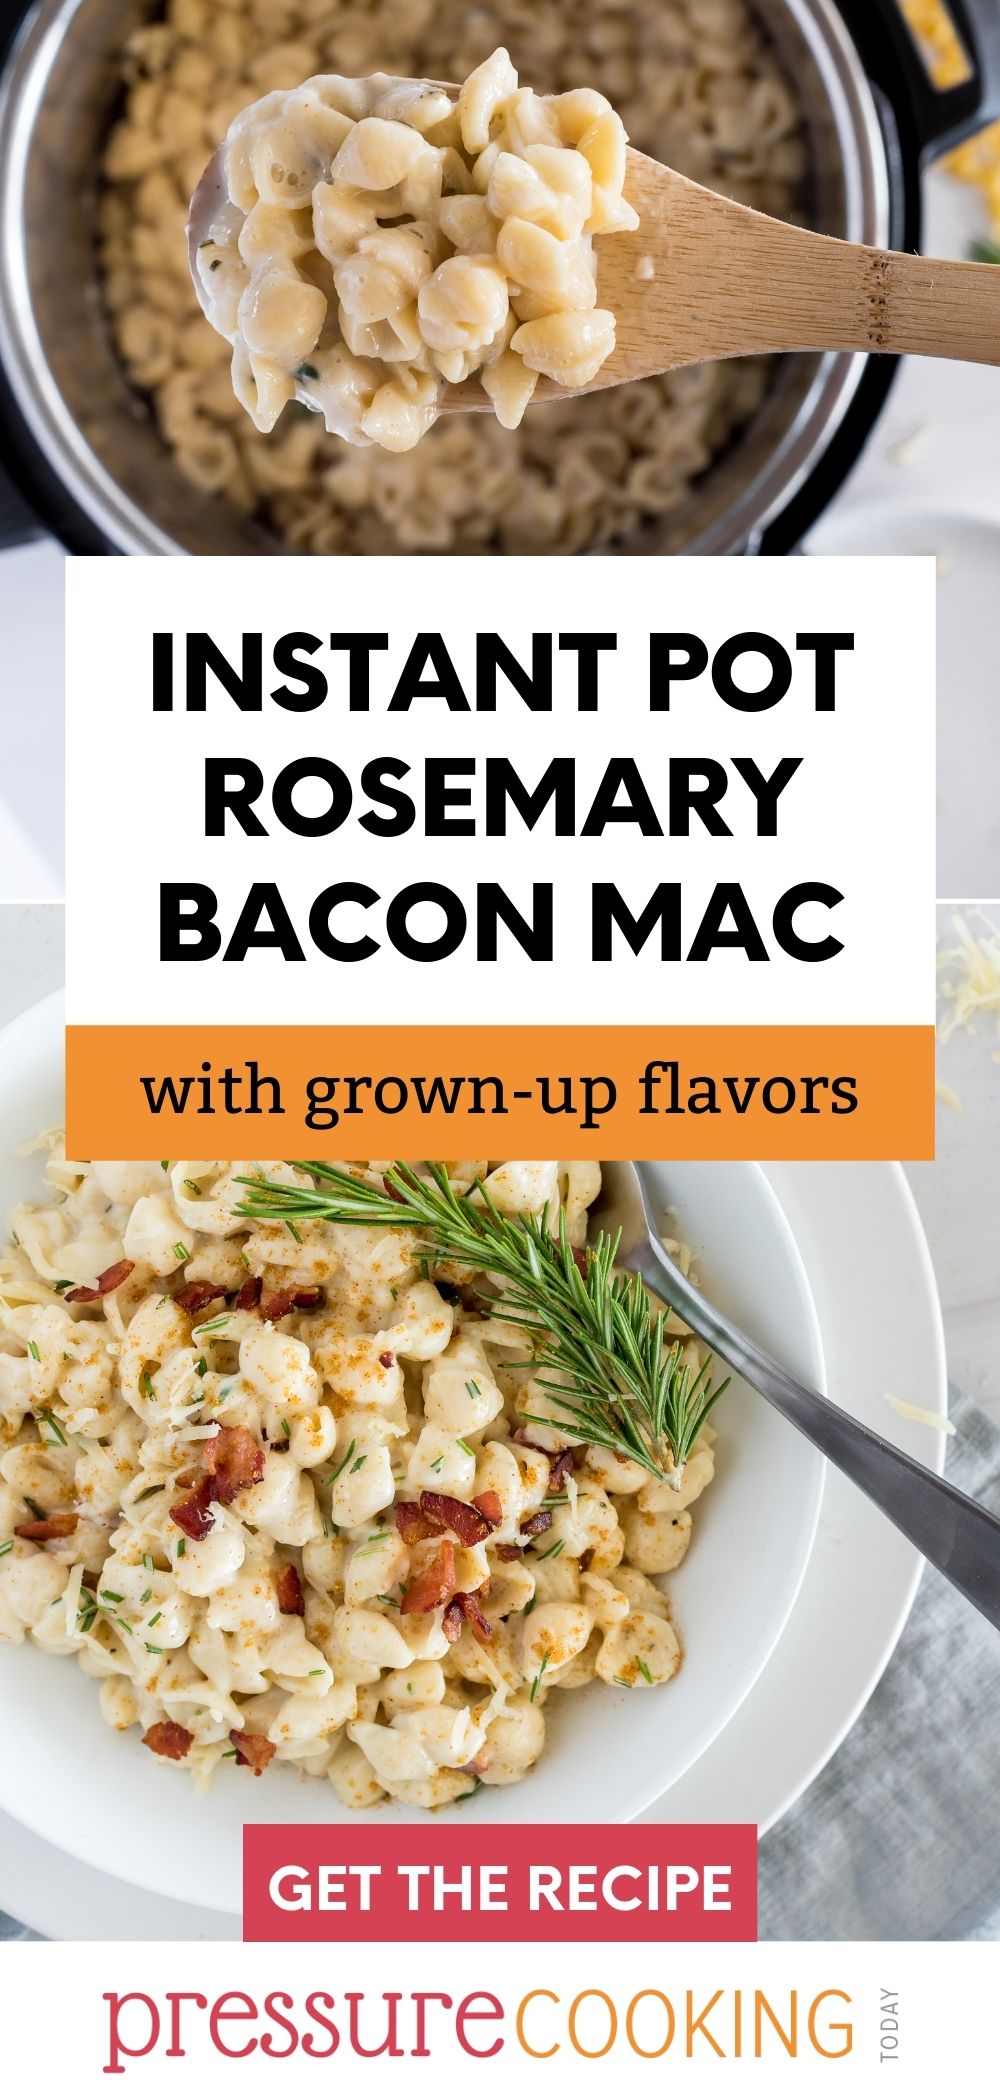 Instant Pot Mac and Cheese made with rosemary and bacon is an easy meal for grown-up tastes with Gruyere cheese, fresh herbs, and bacon on top. Plus your kids will love it too! via @PressureCook2da